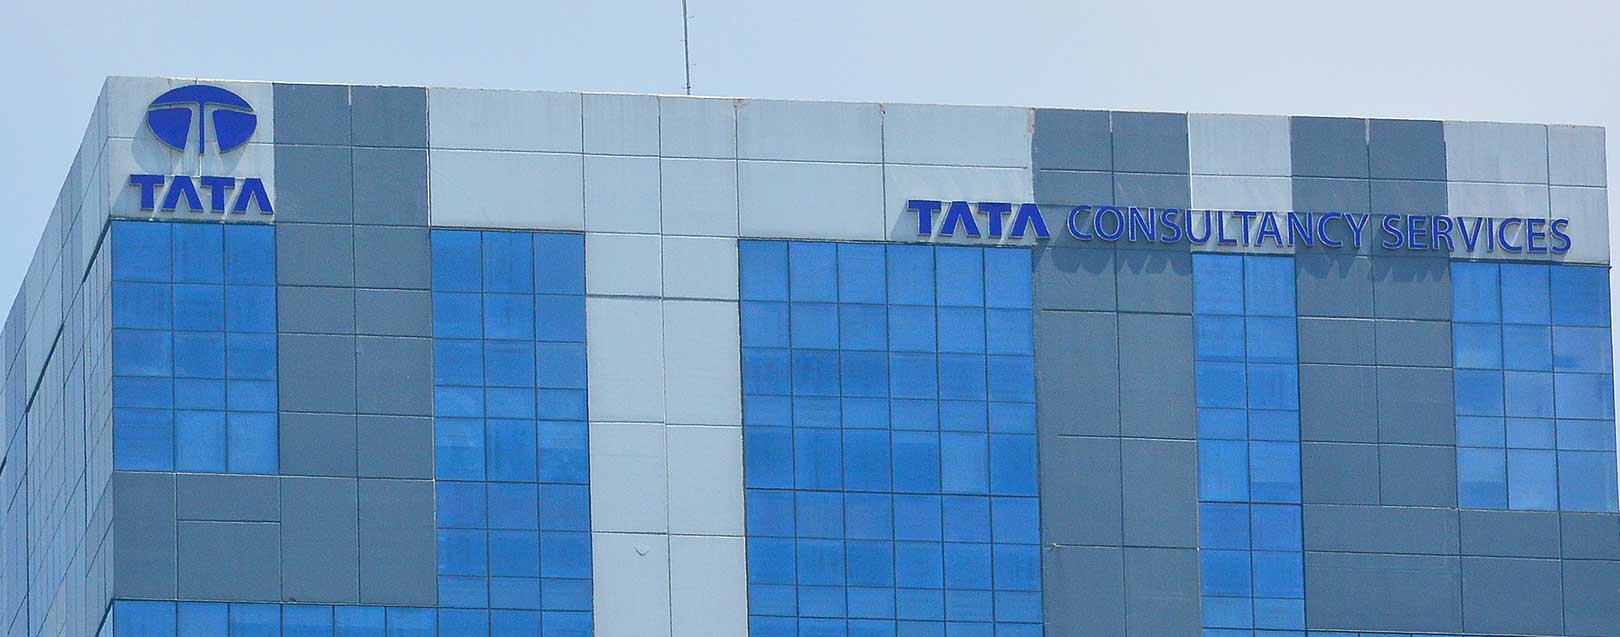 Turnbull asks TCS to open innovation centre in Australia